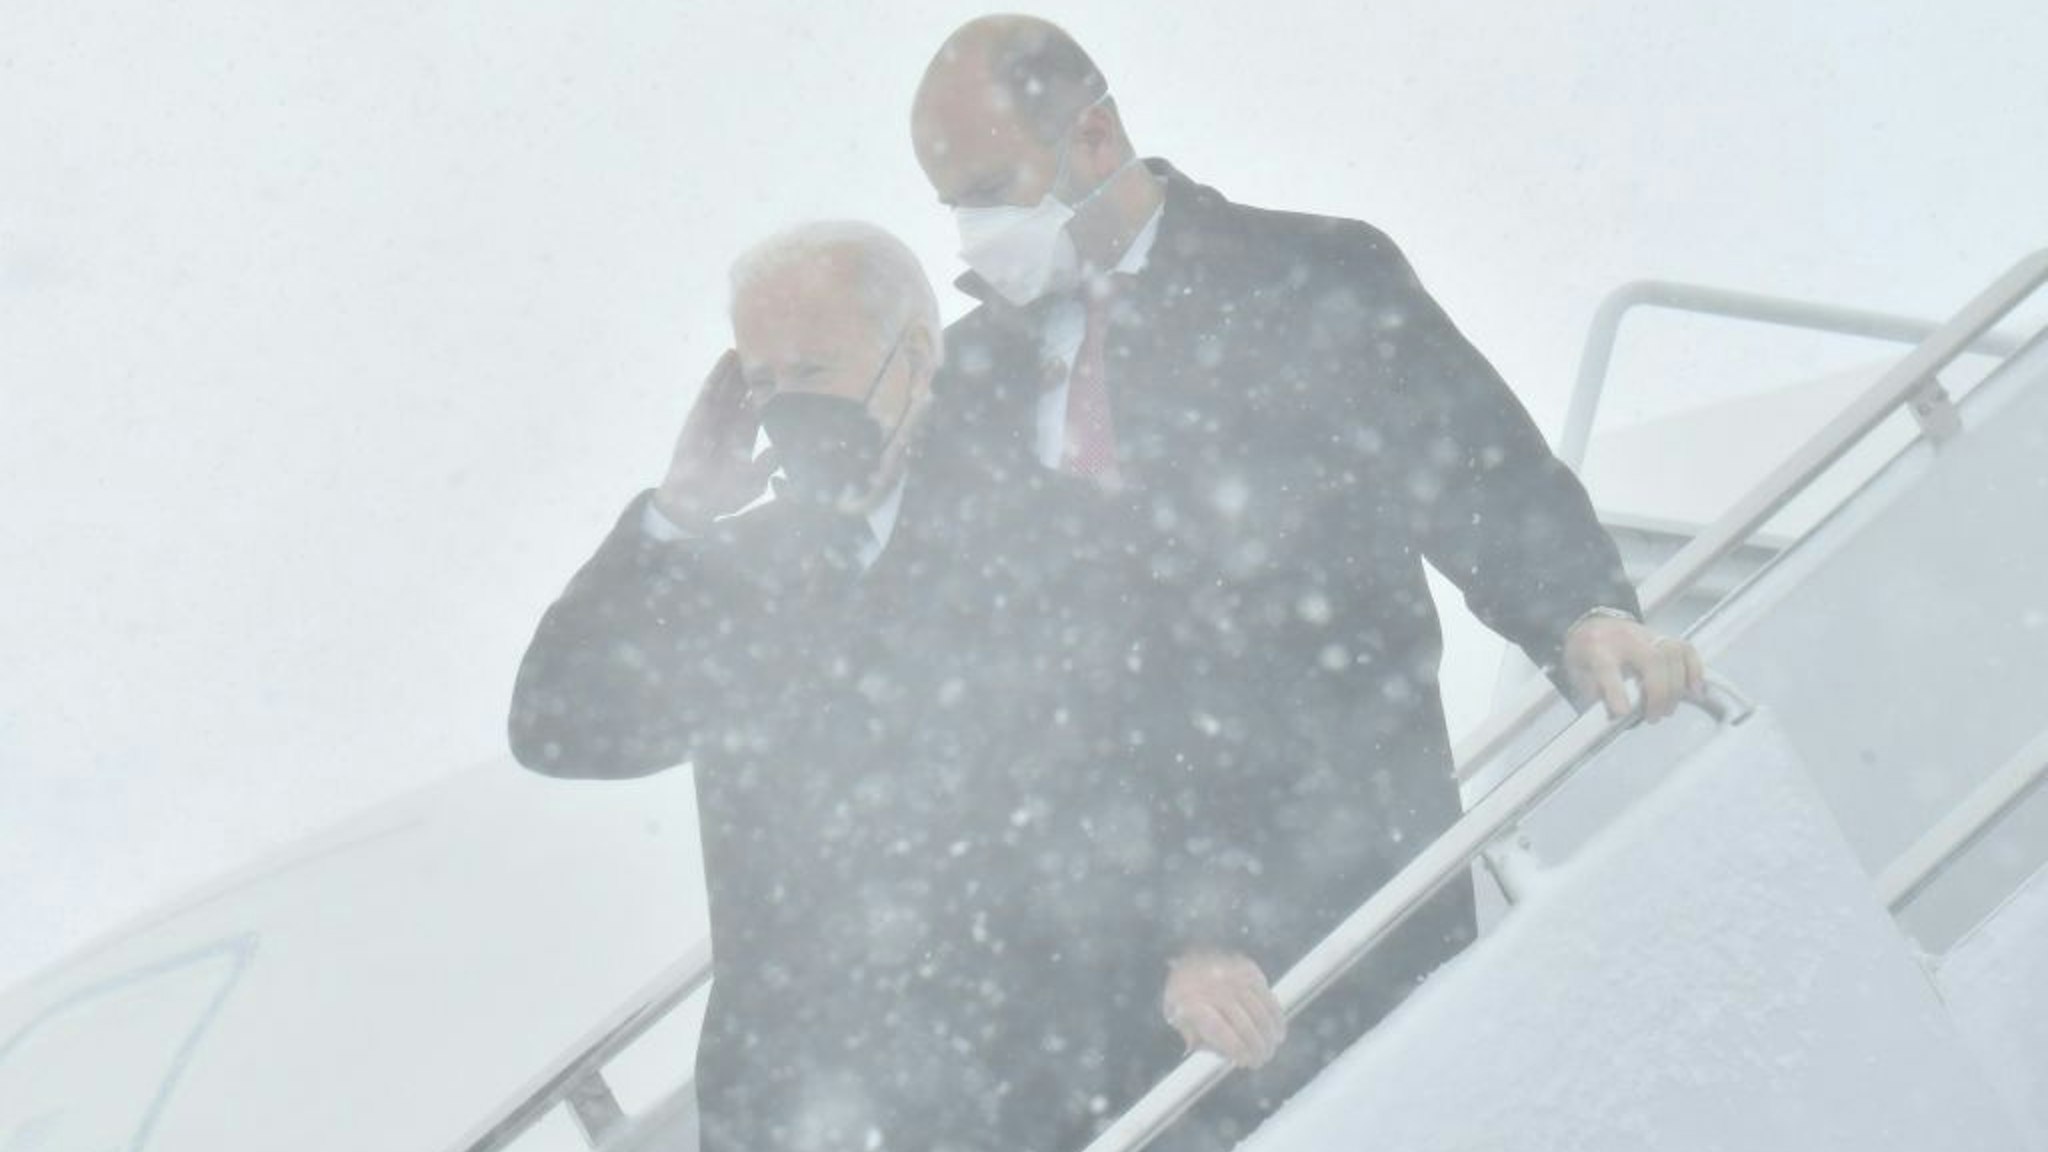 US President Joe Biden salutes as he disembarks from Air Force One during a snow storm upon arrival at Andrews Air Force Base January 3, 2022, in Maryland. (Photo by Nicholas Kamm / AFP) (Photo by NICHOLAS KAMM/AFP via Getty Images)